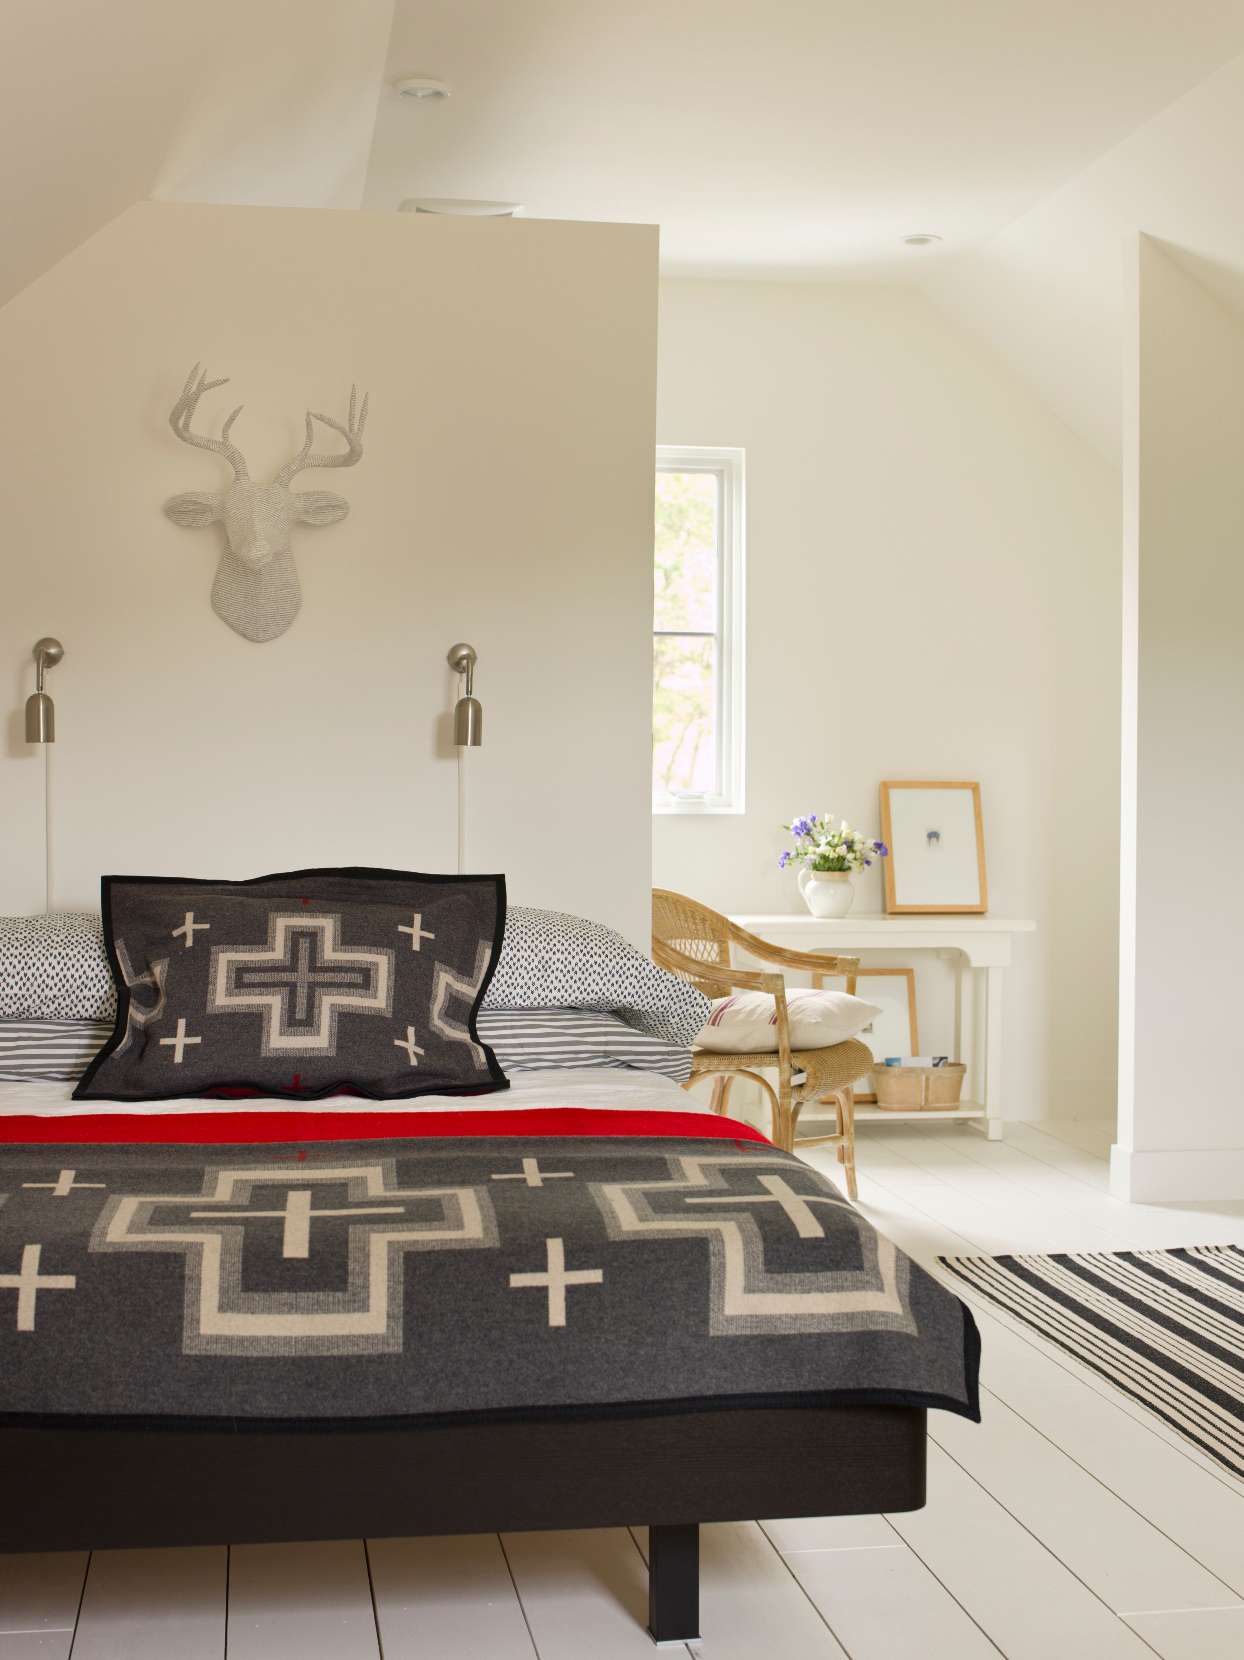 Modern eclectic bedroom with black and red accents